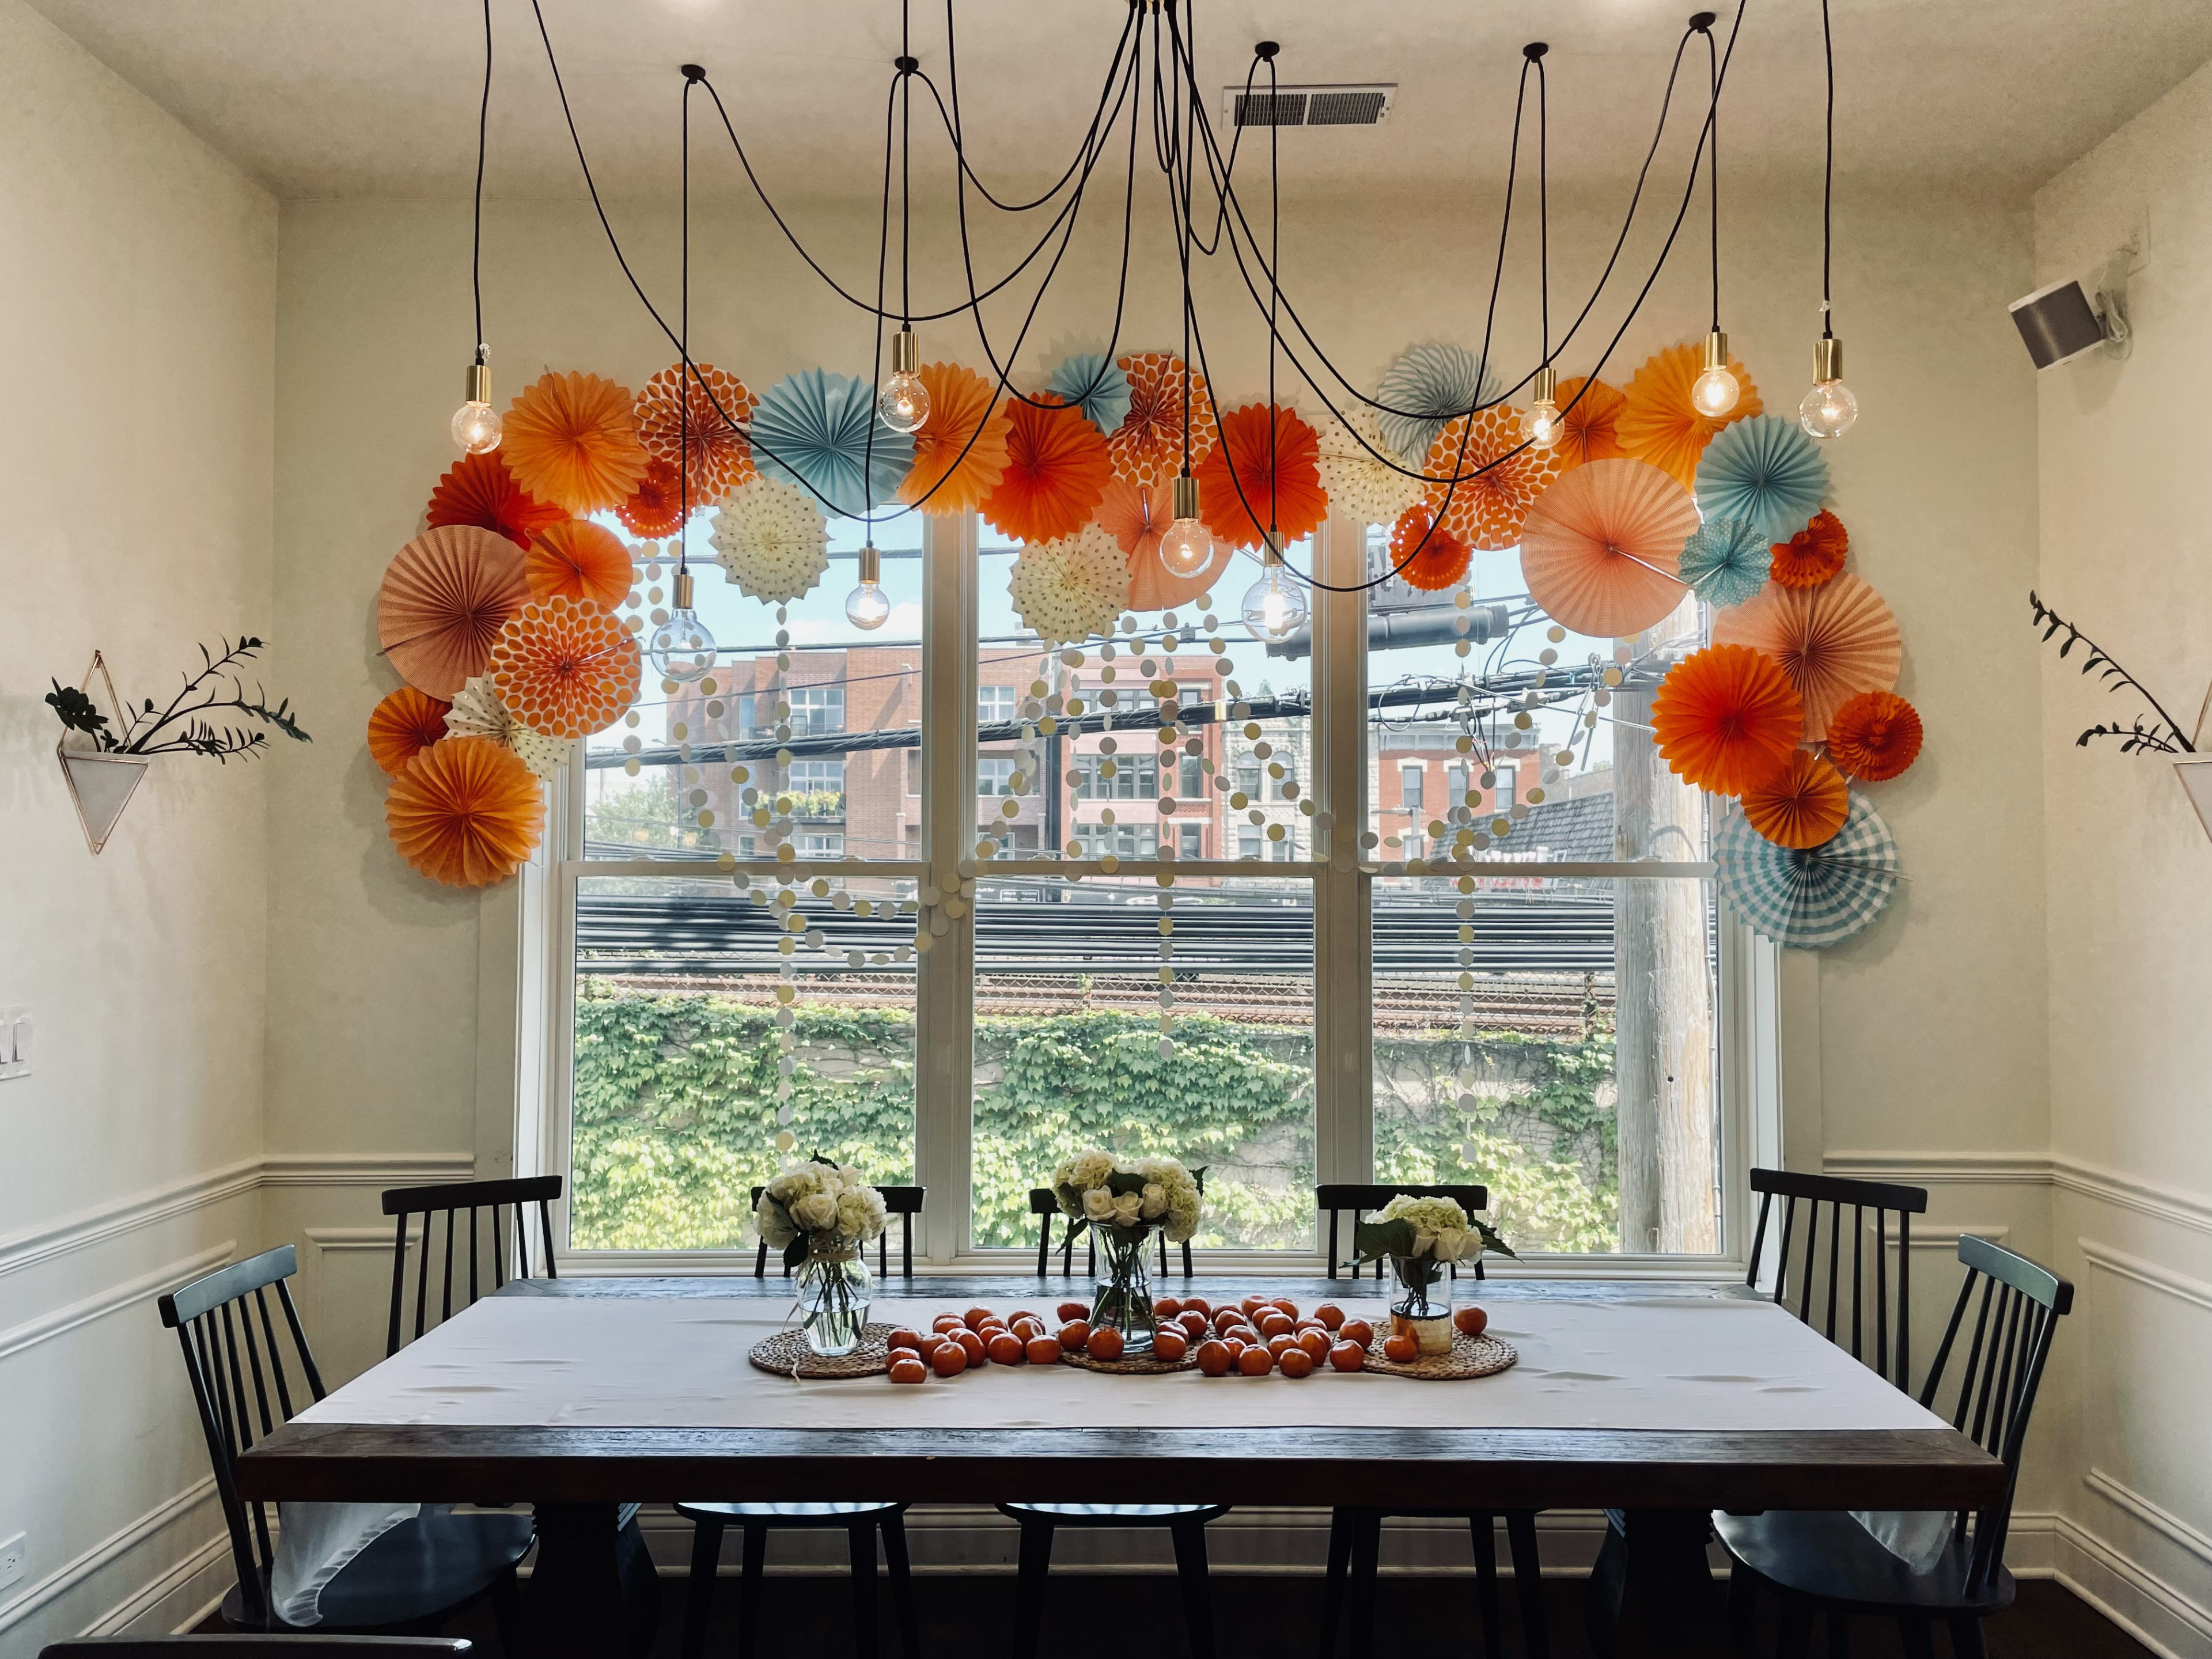 A dining room table with a bunch of paper umbrellas hanging from the ceiling for a gender neutral baby shower.